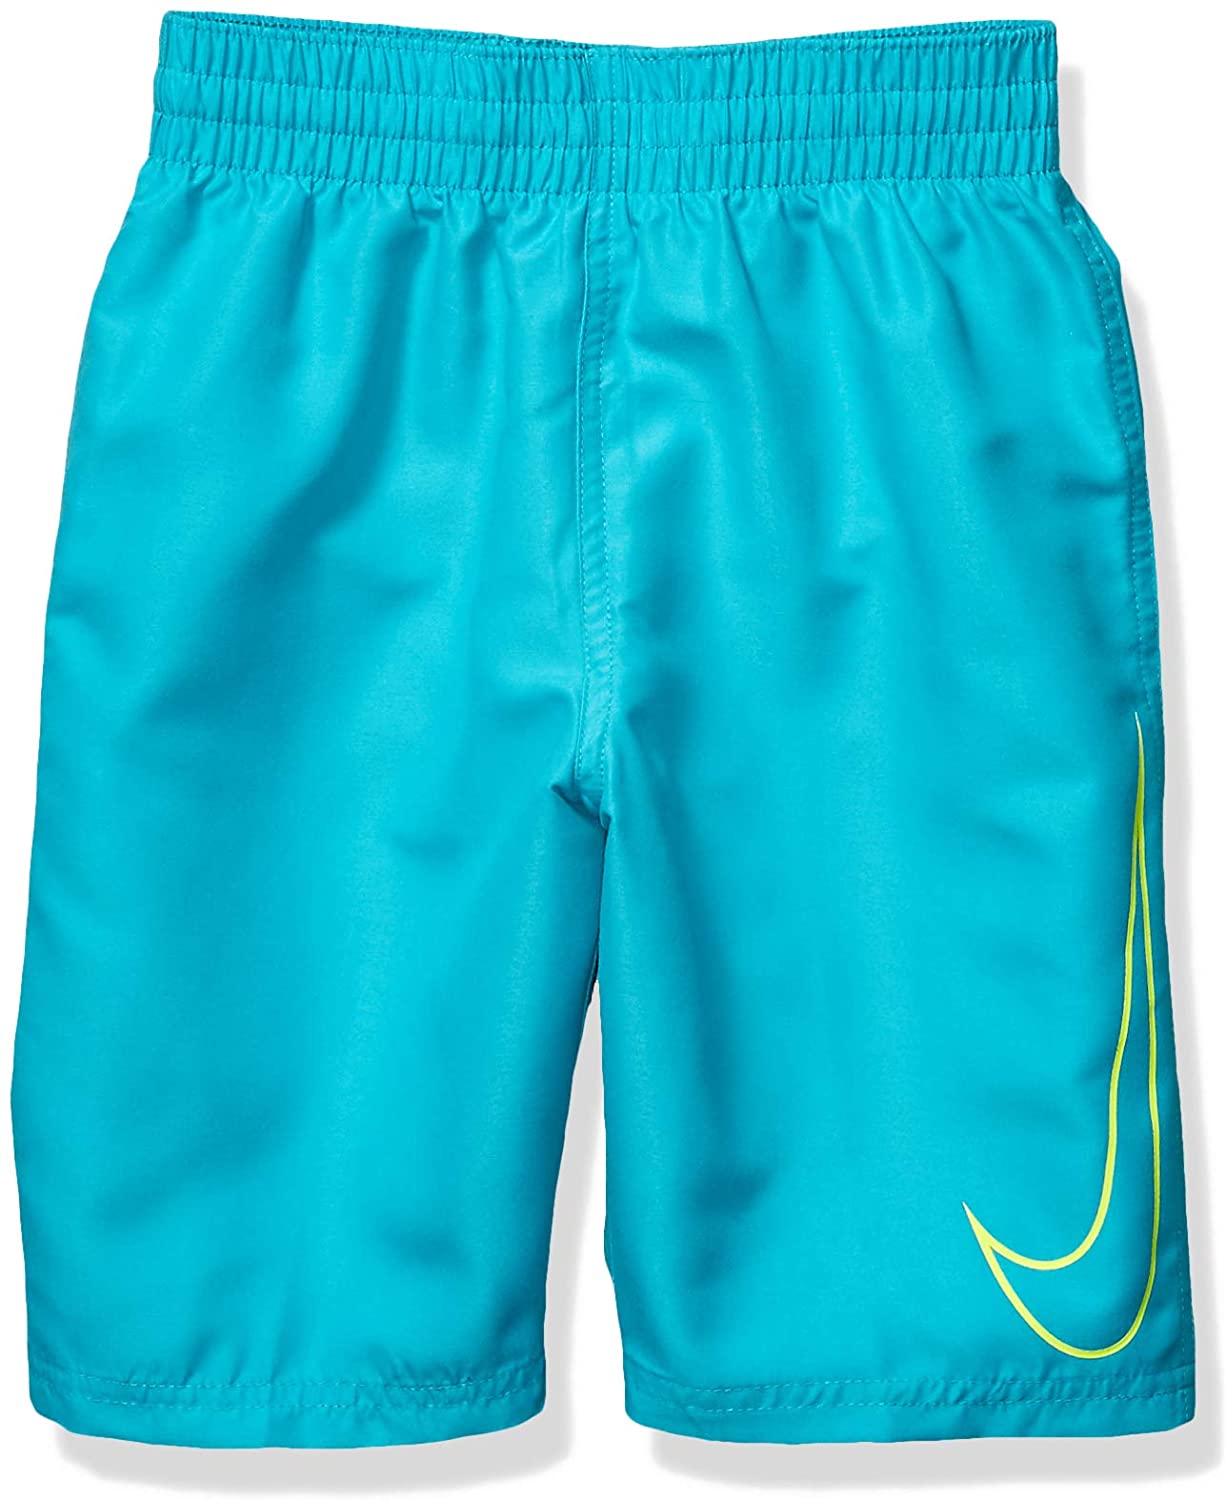 Boy's Nike Big Swoosh Solid Lap Volley Short Swim Trunk in Oracle Aqua color from the front